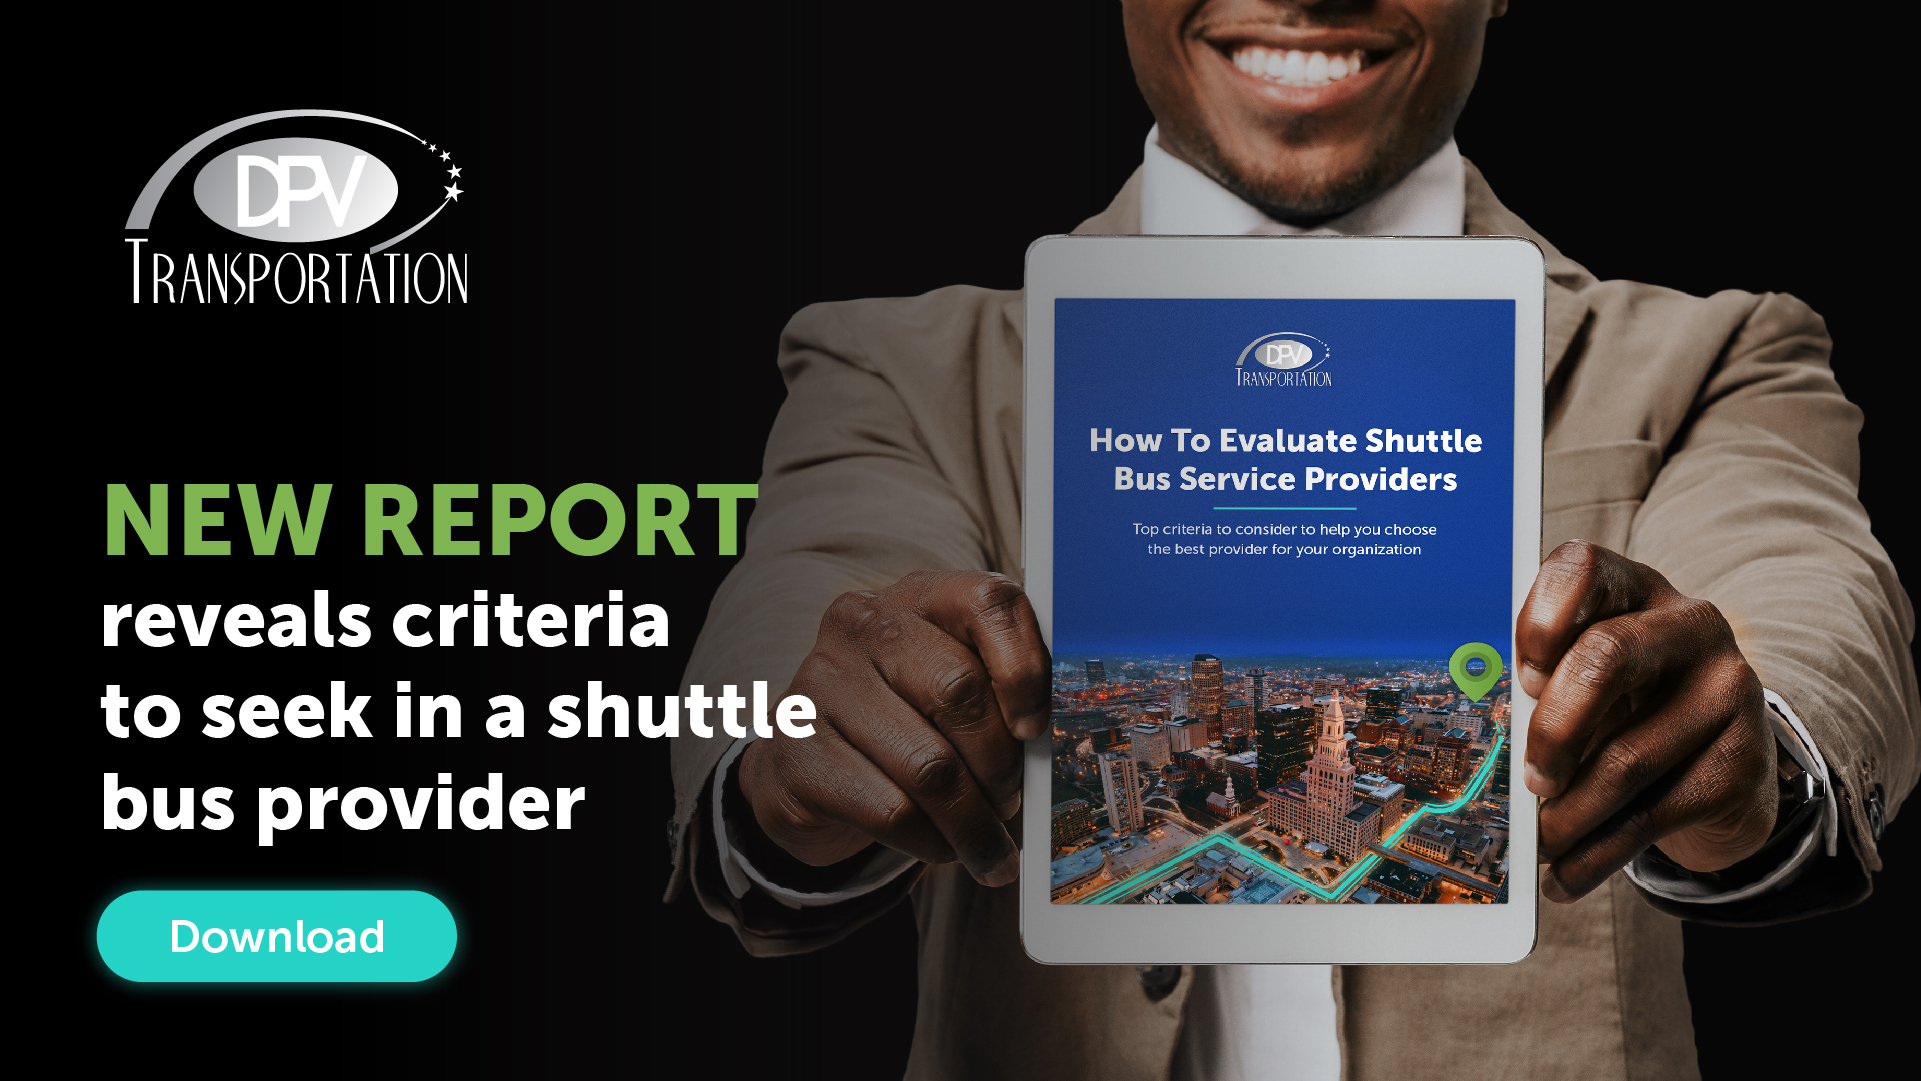 How To Evaluate Shuttle Bus Service Providers